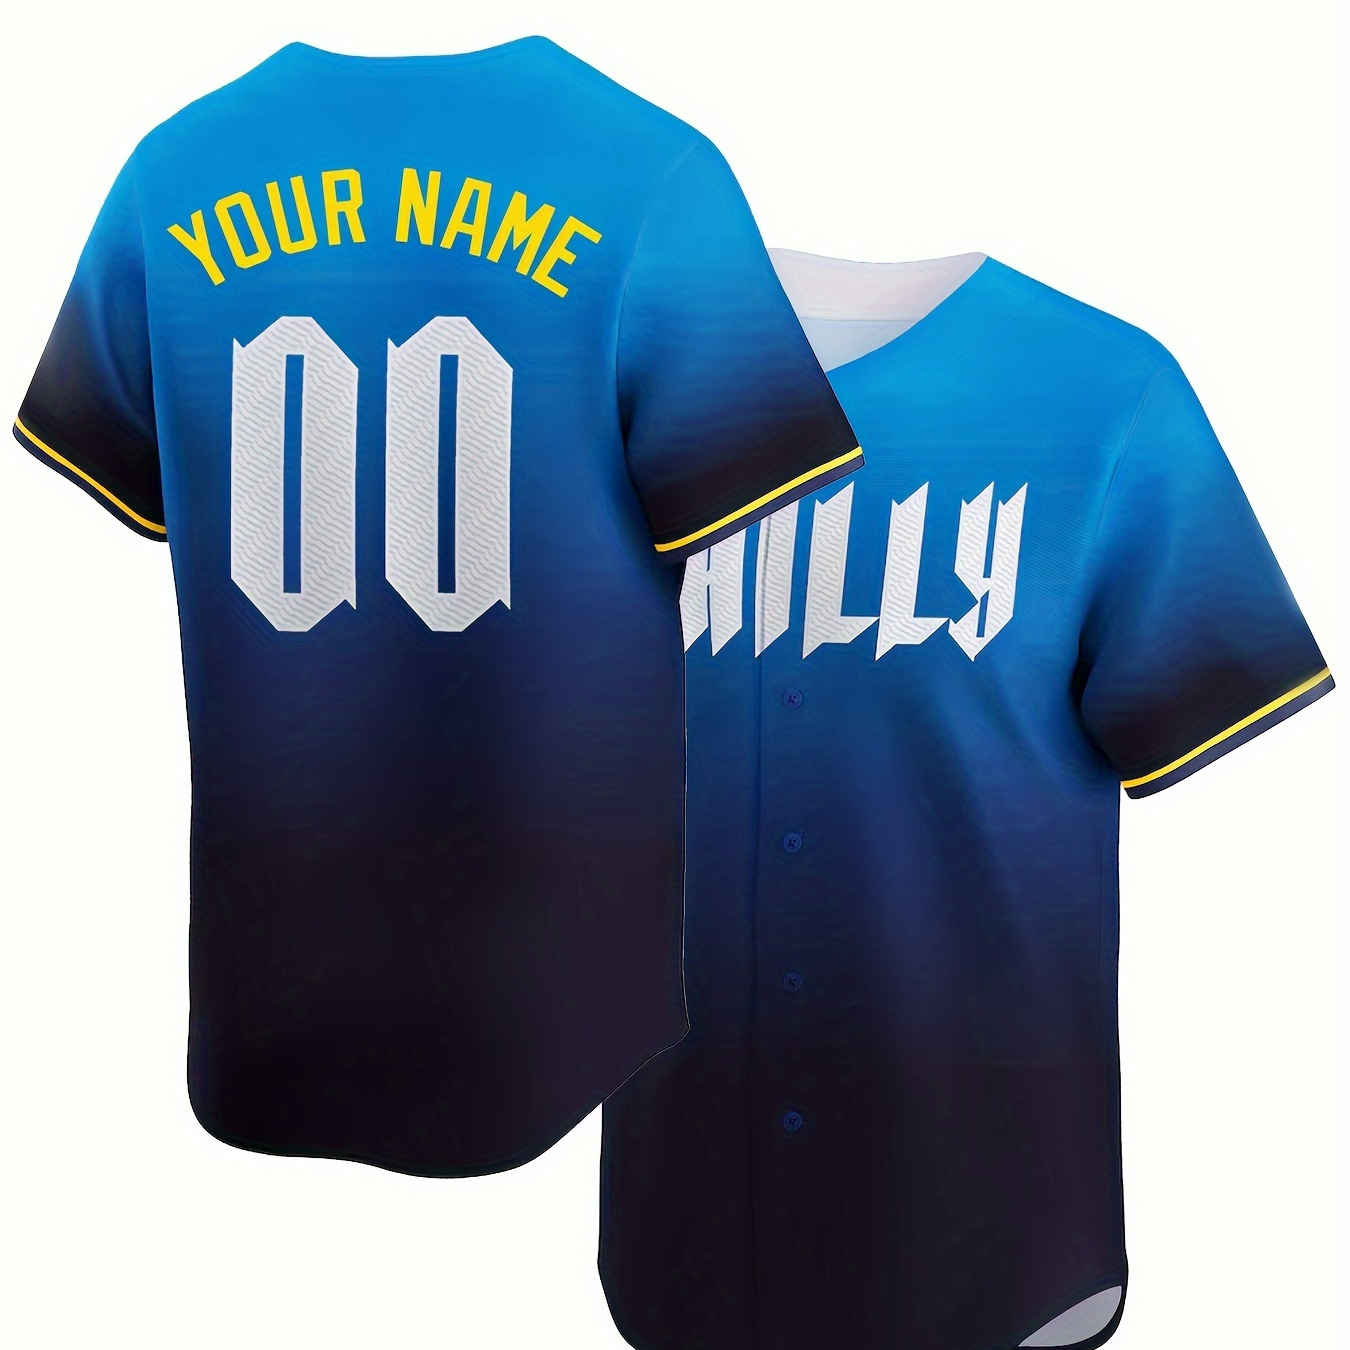 

Customized Name And Number Design, Men's Short Sleeve Breathable V-neck Baseball Jersey, Sports Shirt For Team Training